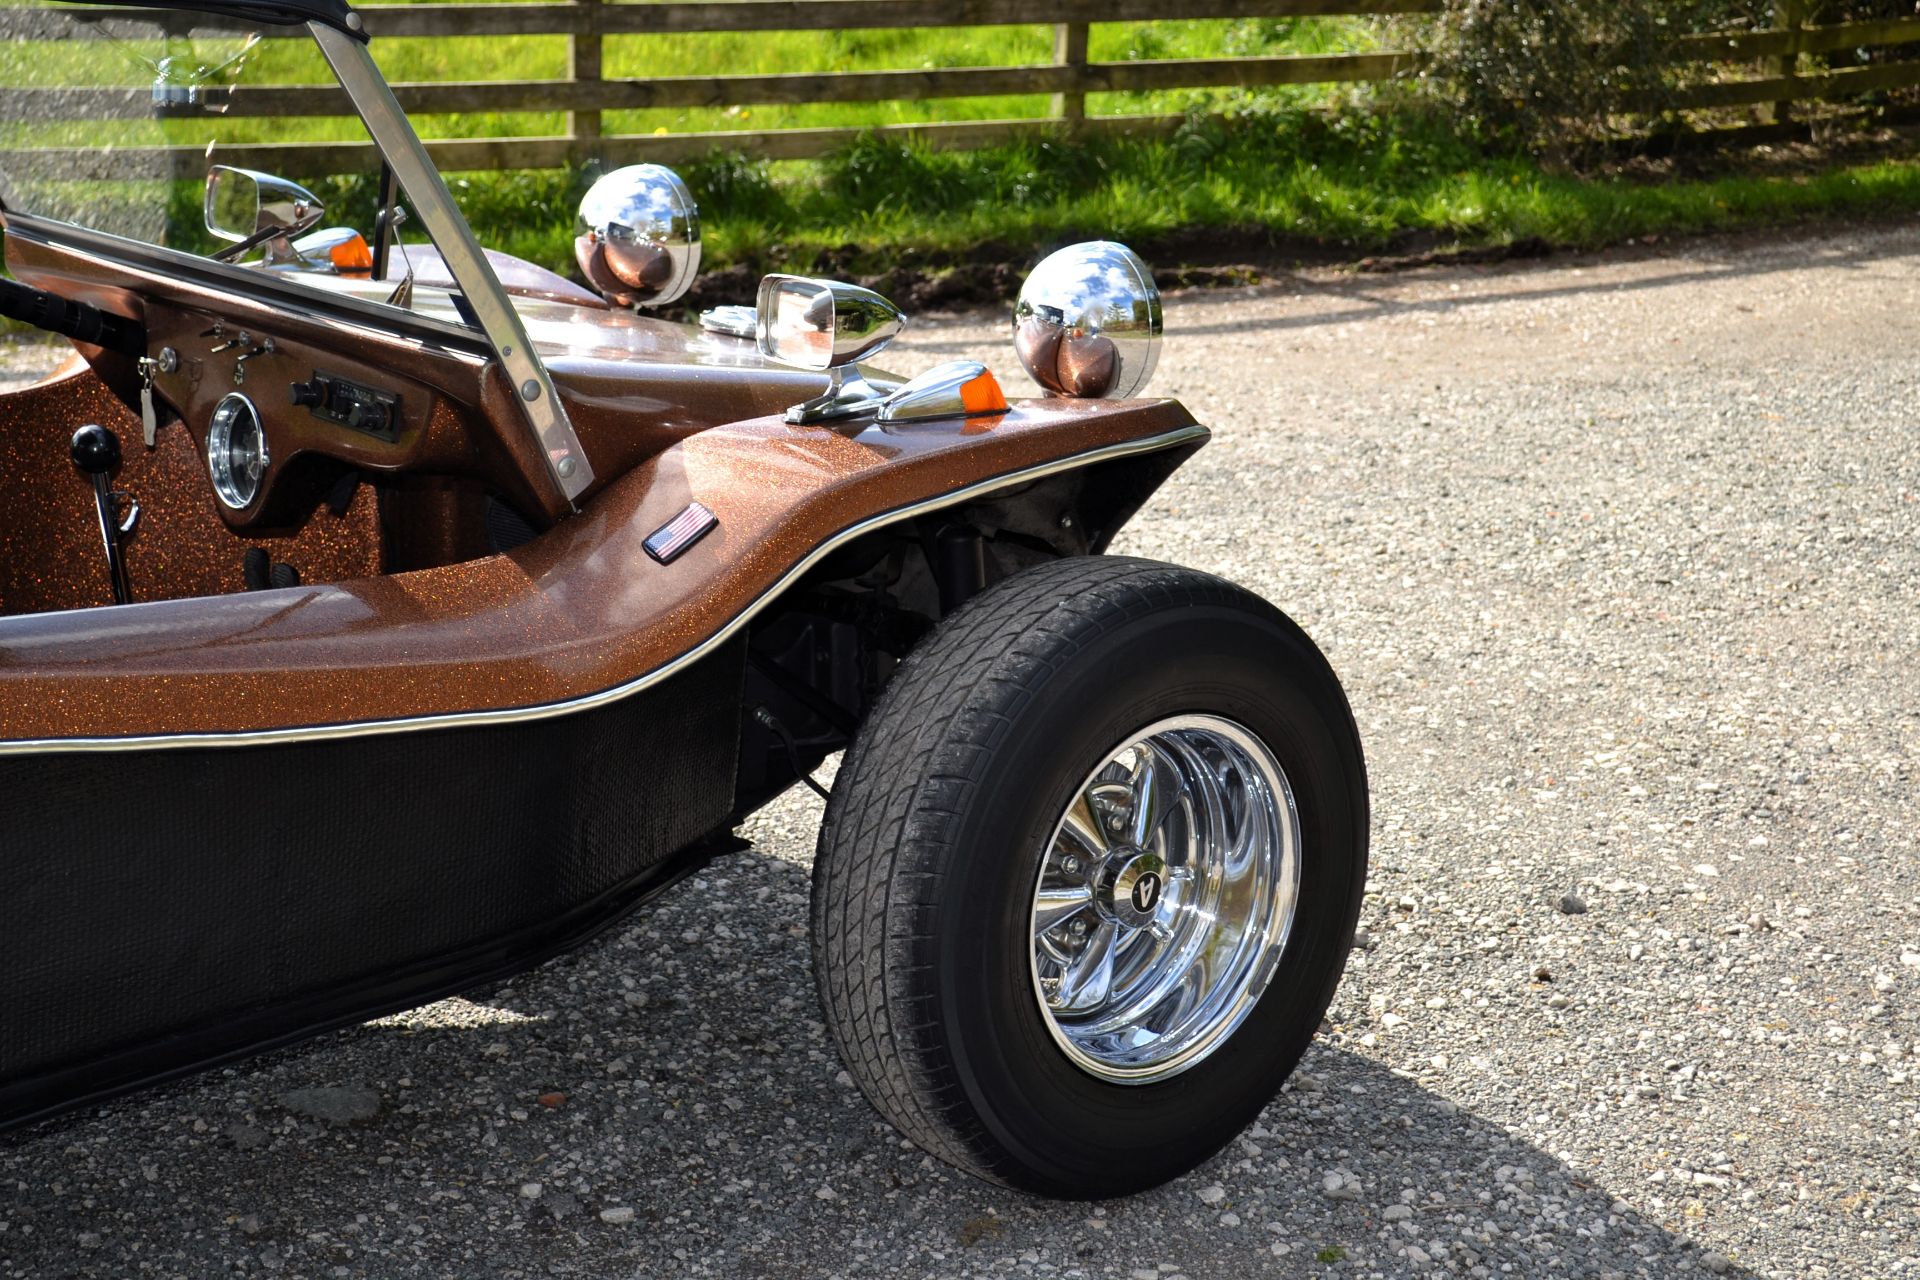 1968 Volkswagen Beach Buggy SWB ‘Meyers Manx Evocation’ No Reserve - Image 11 of 29